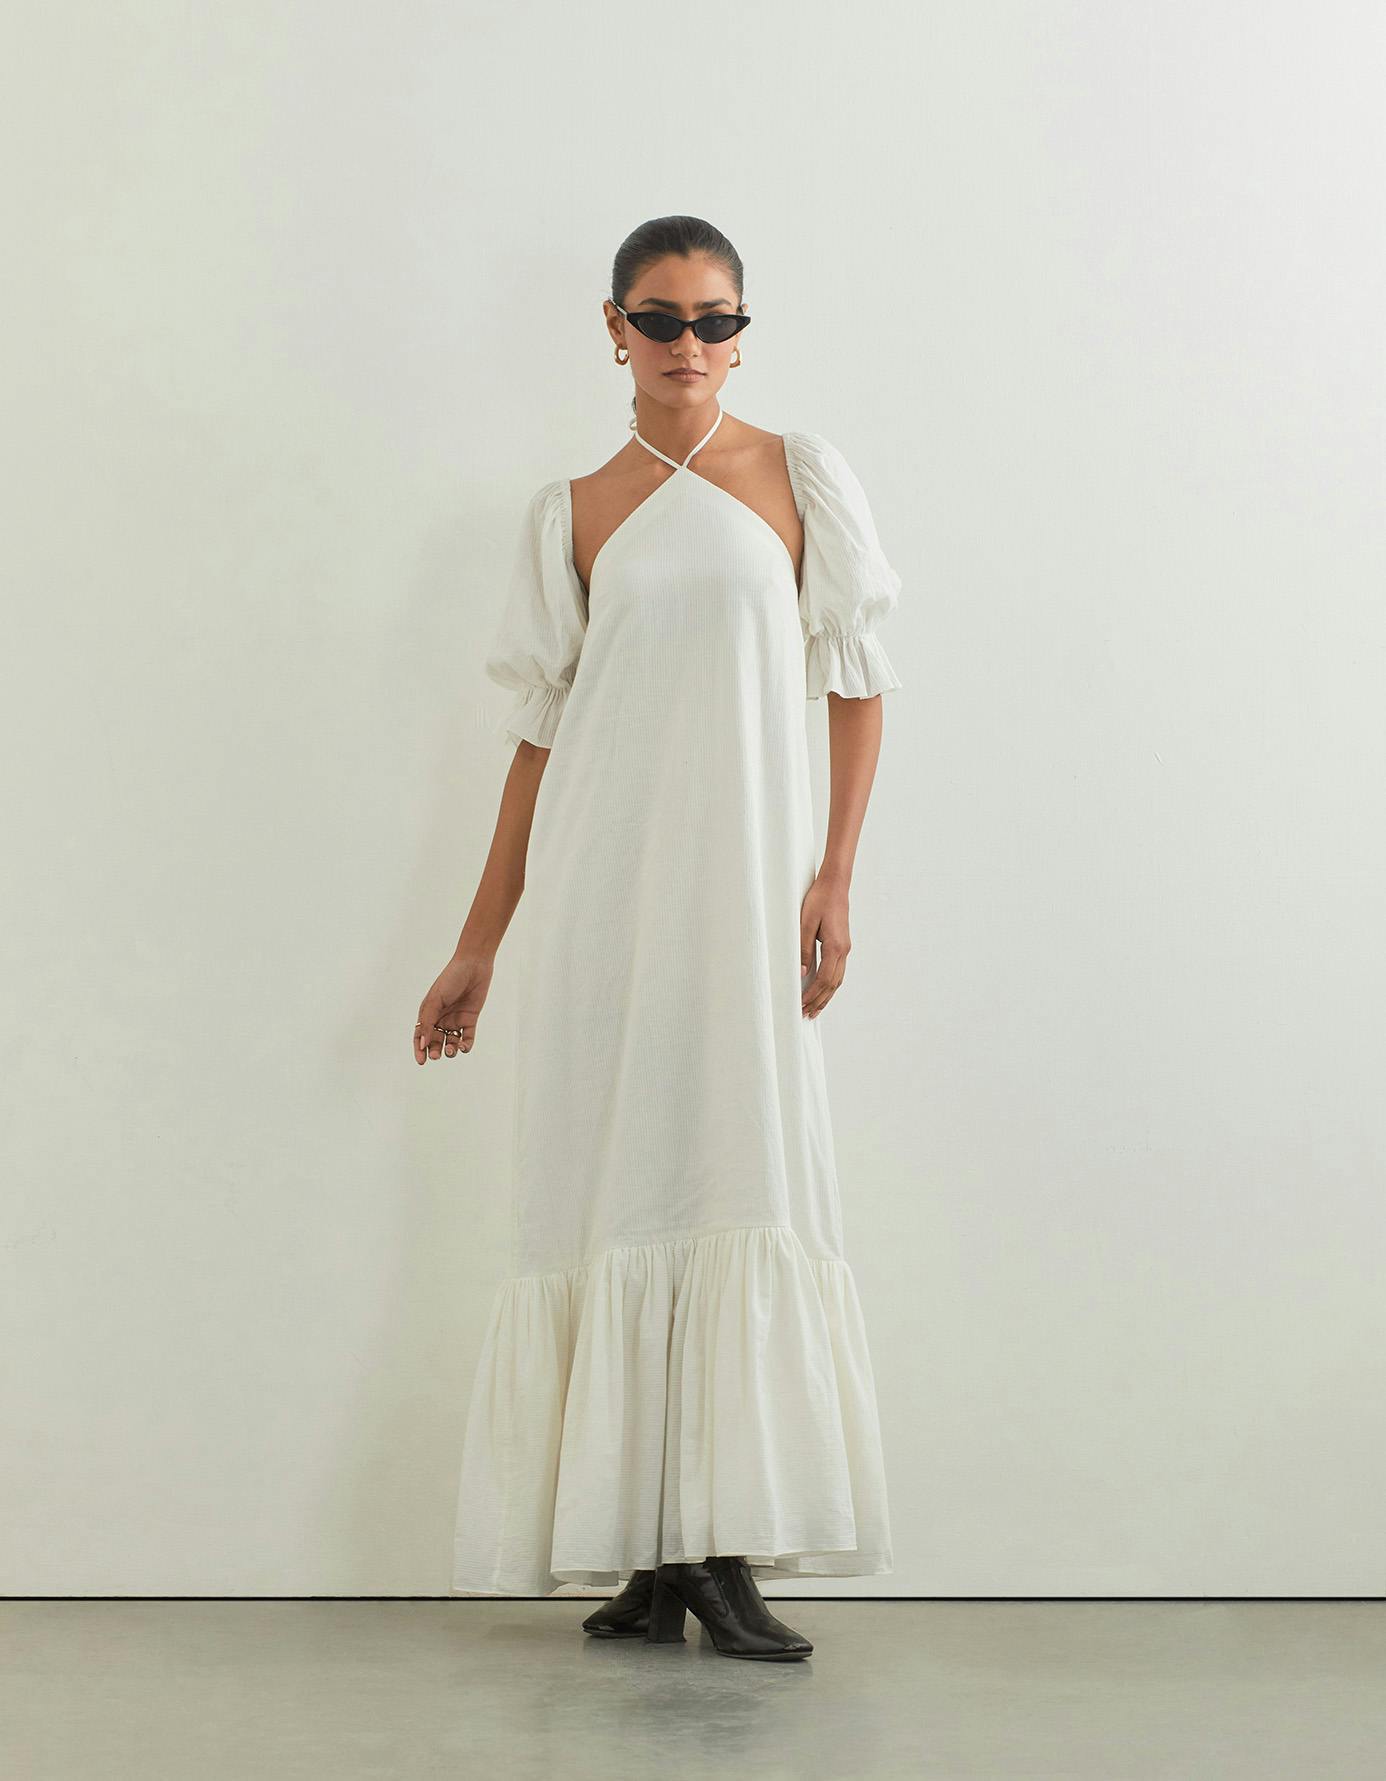 BELLA DRESS + LUCY SLEEVES In White, a product by SIX BUTTONS DOWN